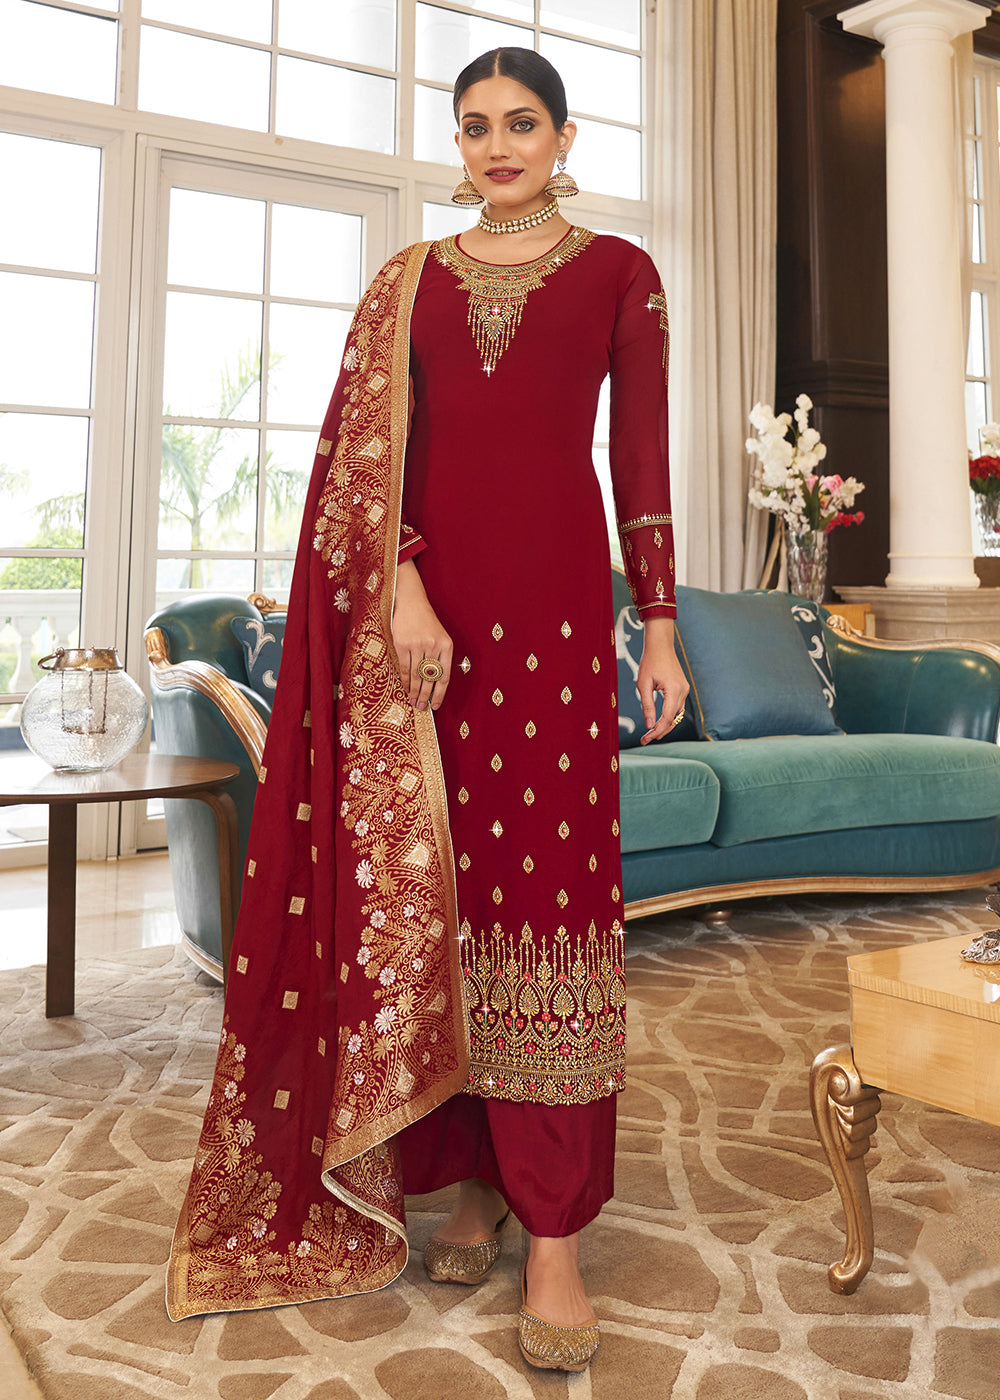 Buy Now Wedding Party Capricious Maroon Thread & Zari Salwar SuitOnline in USA, UK, Canada & Worldwide at Empress Clothing.